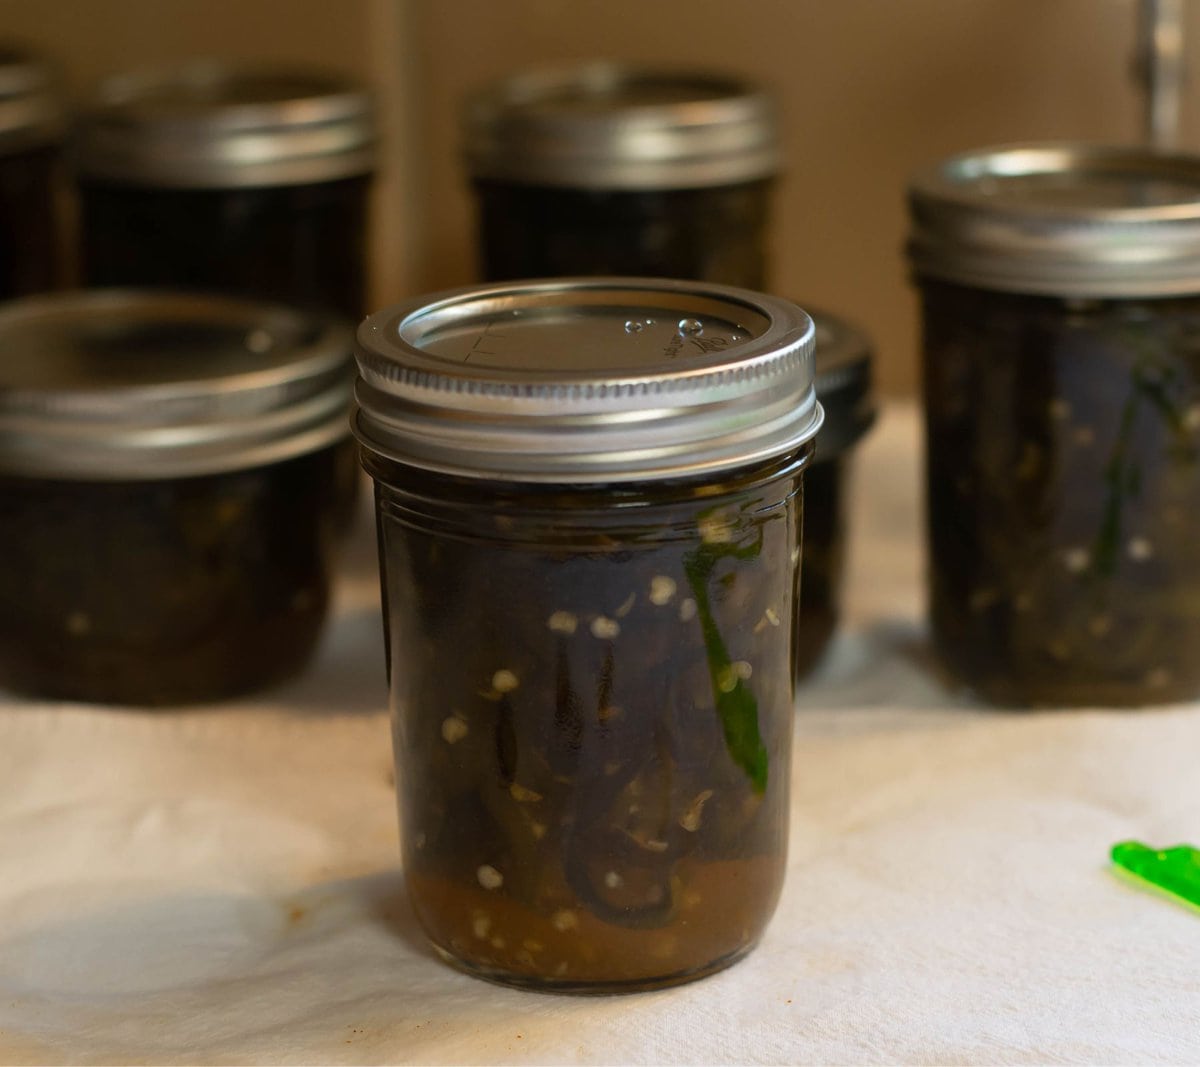 Hot water bath canned ½ pint jars of candied jalapenos cooling on a towel.